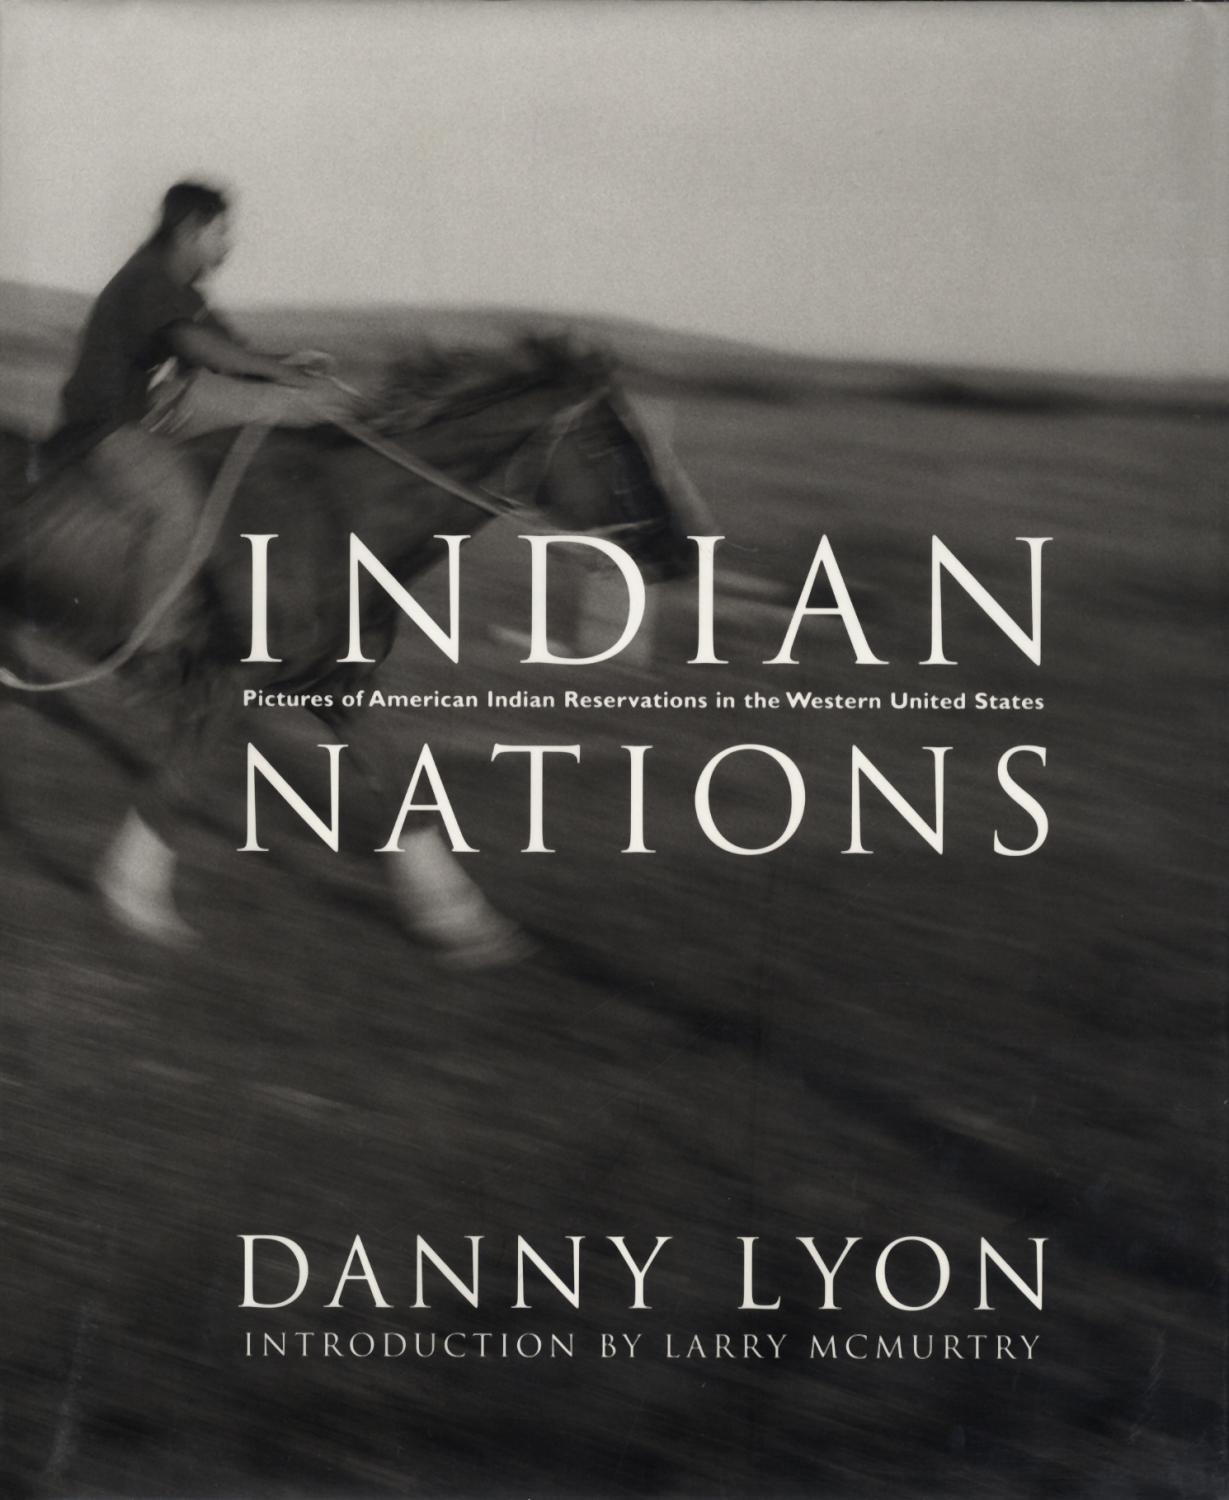 Danny Lyon: Indian Nations: Pictures of American Indian Reservations in the Western United States [SIGNED] - LYON, Danny, MCMURTRY, Larry